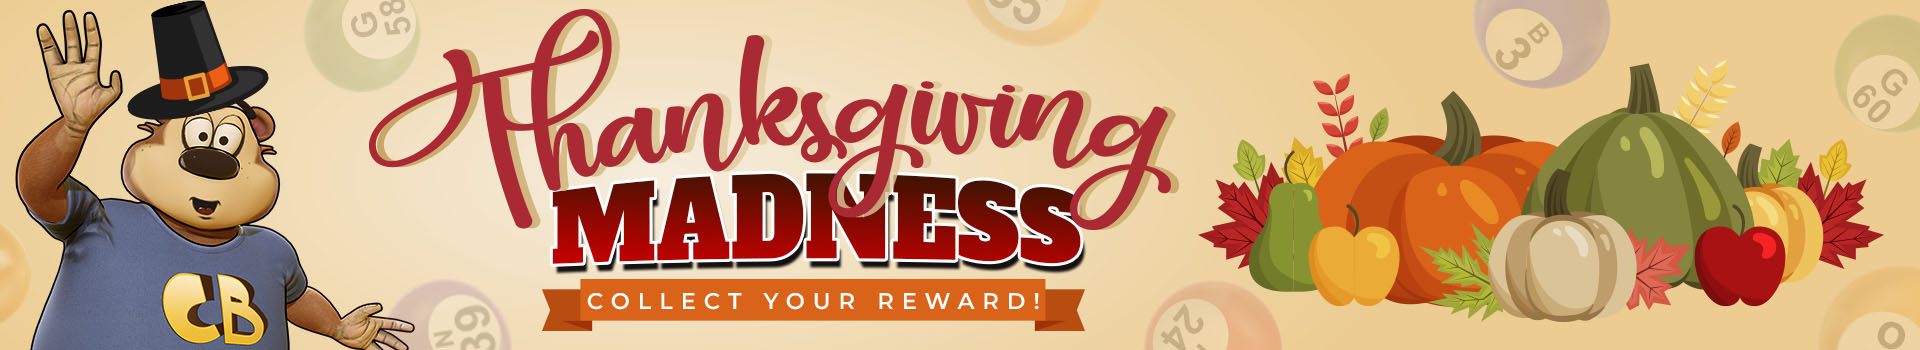 thanksgiving-madness banner